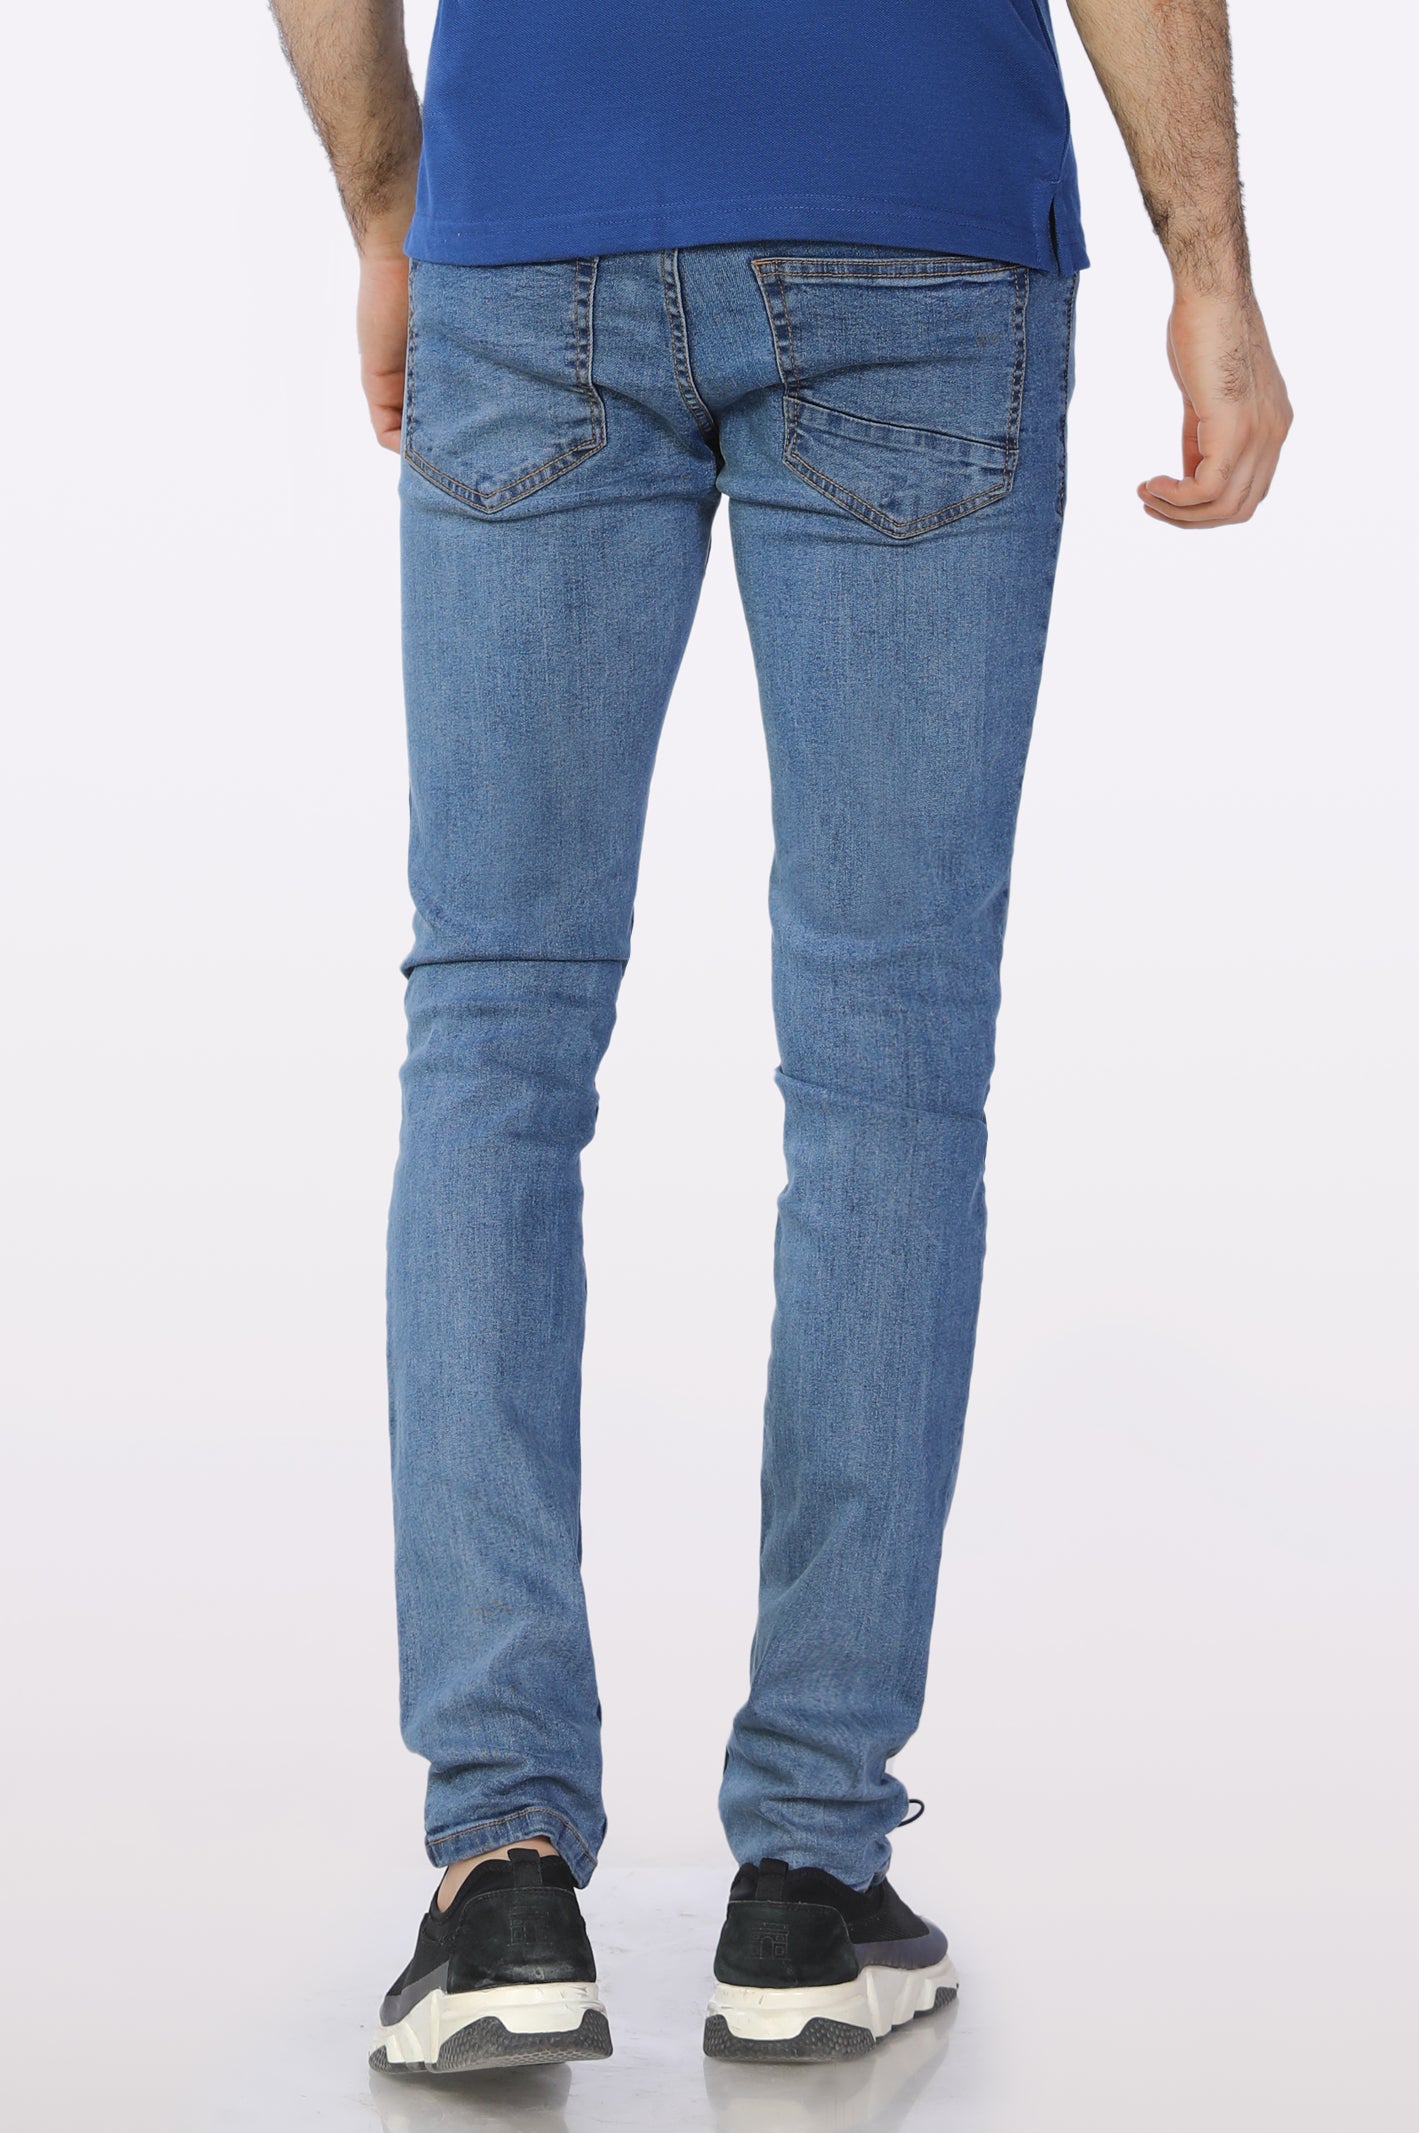 Light Blue Slim Fit Jeans From Diners